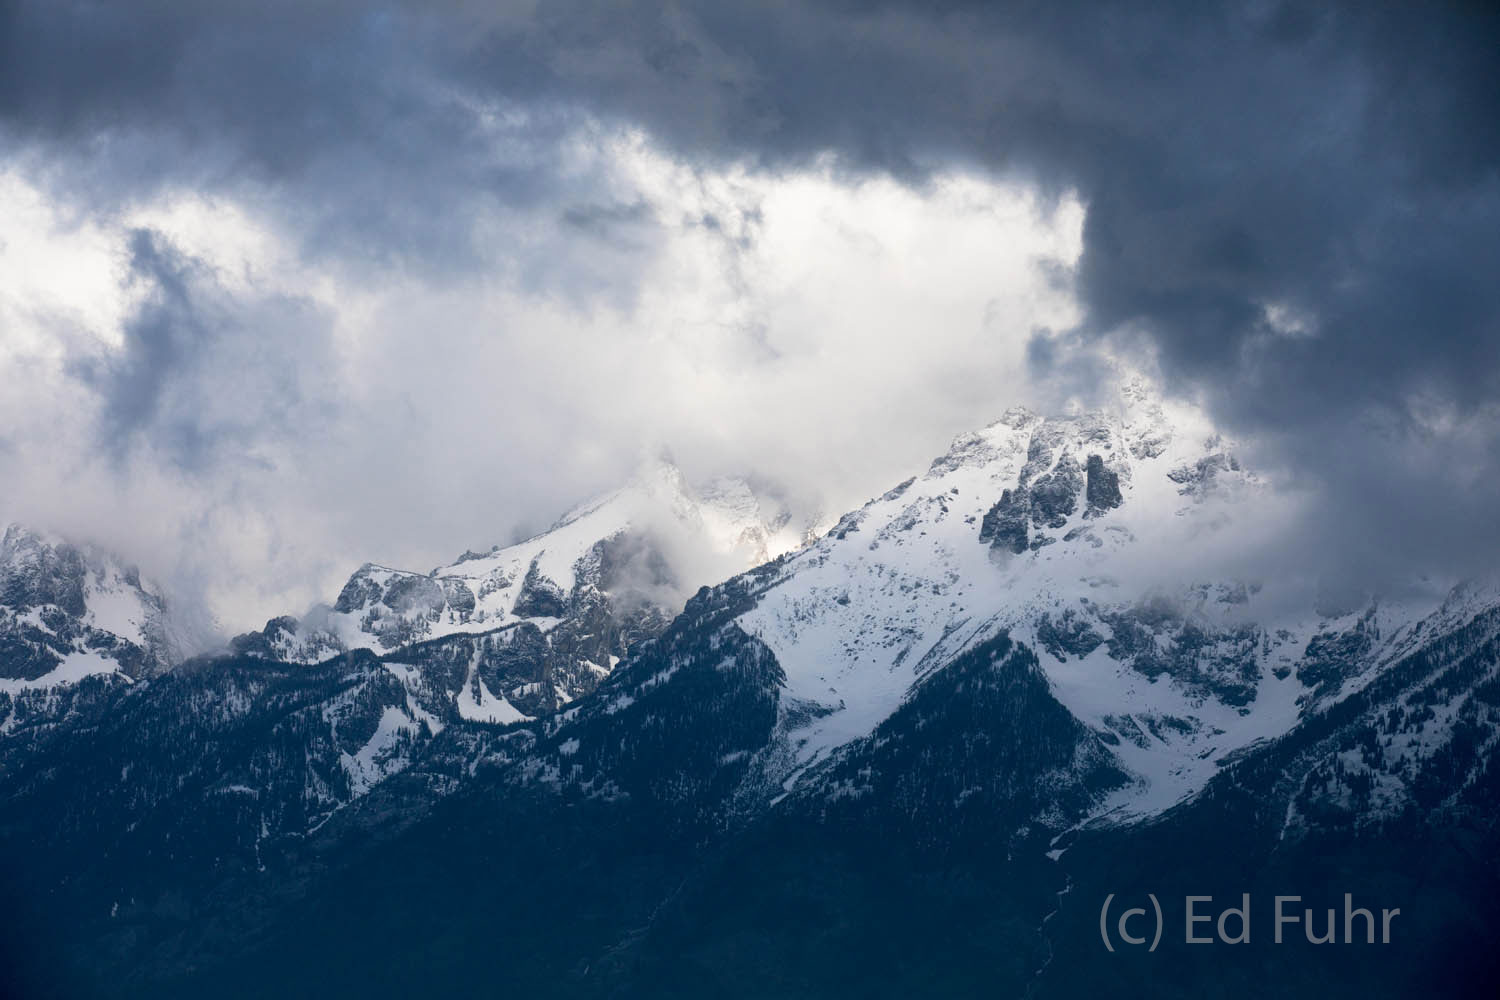 A storm struggles to pass by the Teton range.